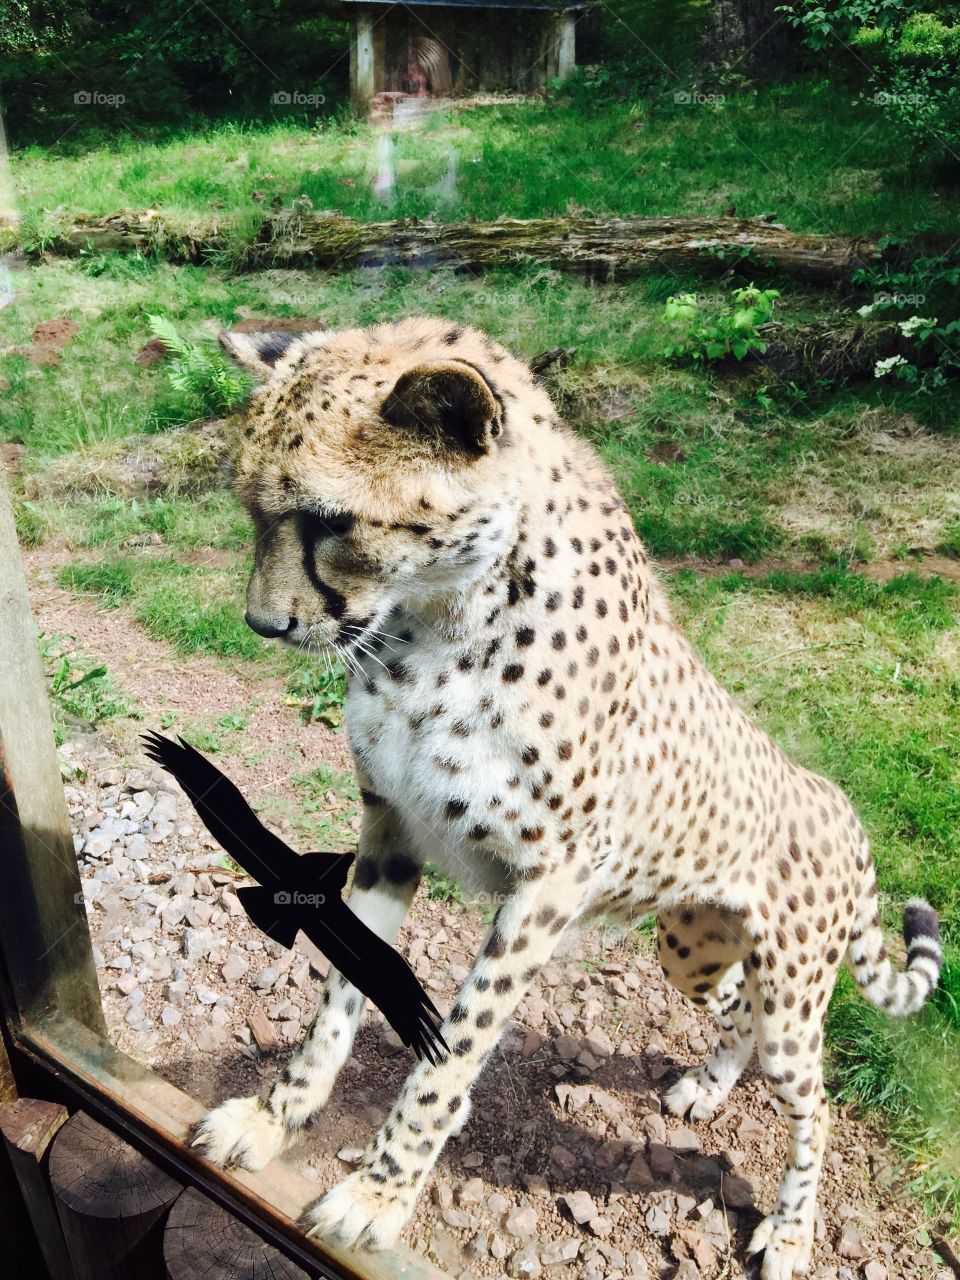 Cheetah . There was a chicken on the other side of the enclosure taunting her so she came up to the glass to get a closer look 